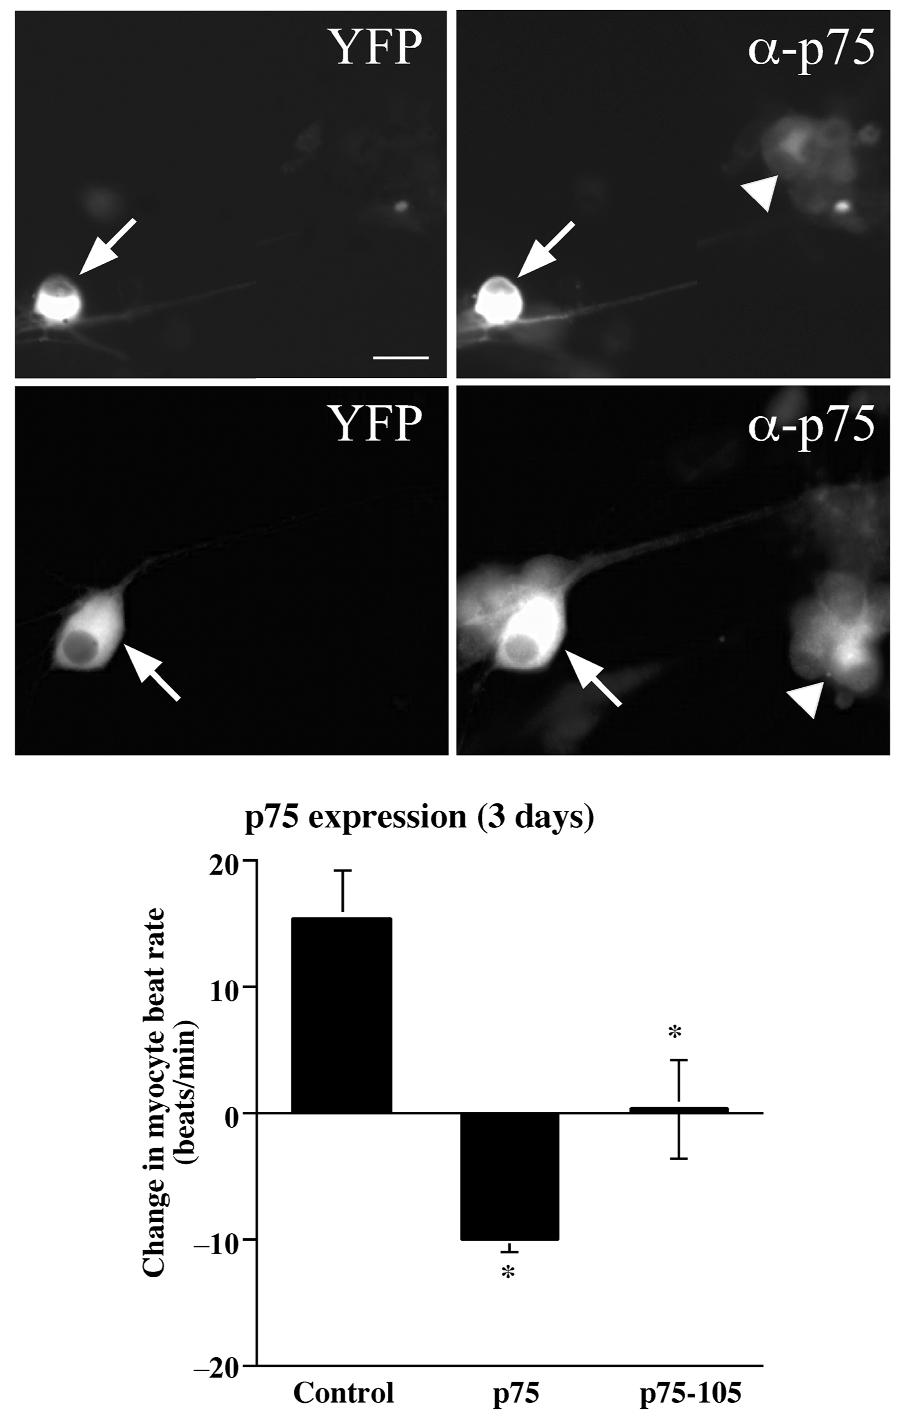 Fig. 5. Overexpression of the p75 receptor induced inhiitory neurotrnsmission.